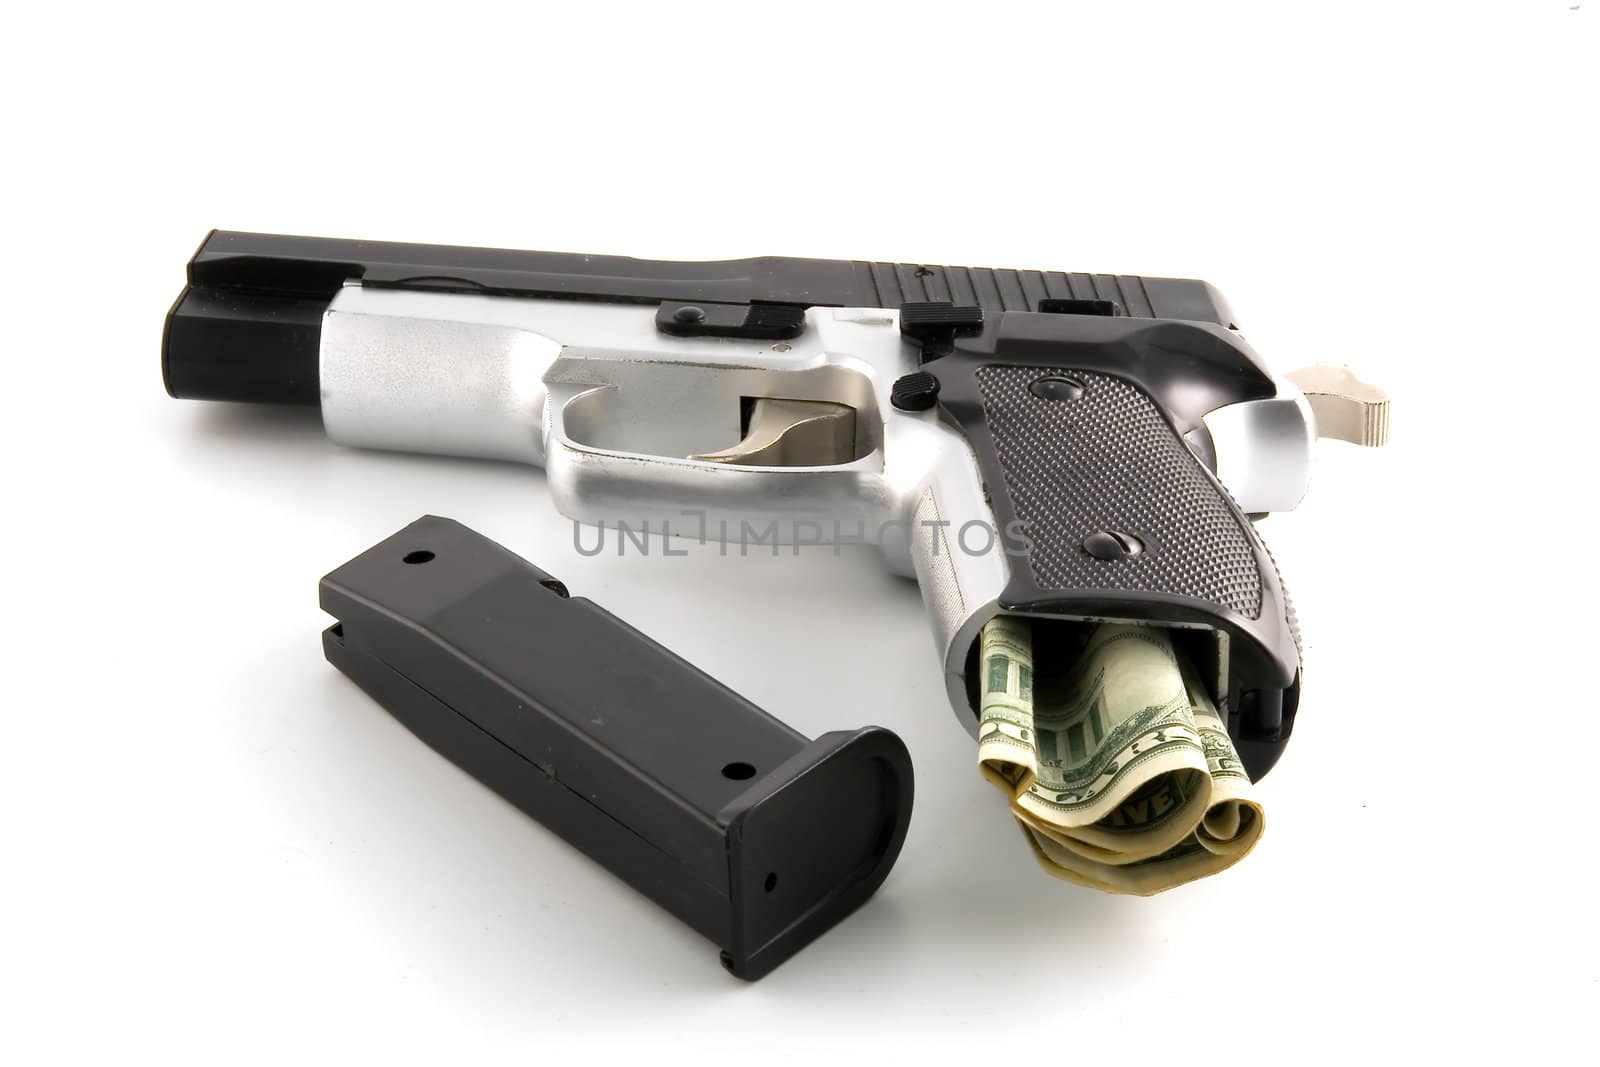 The pistol loaded by dollars on white background. Isolated object.